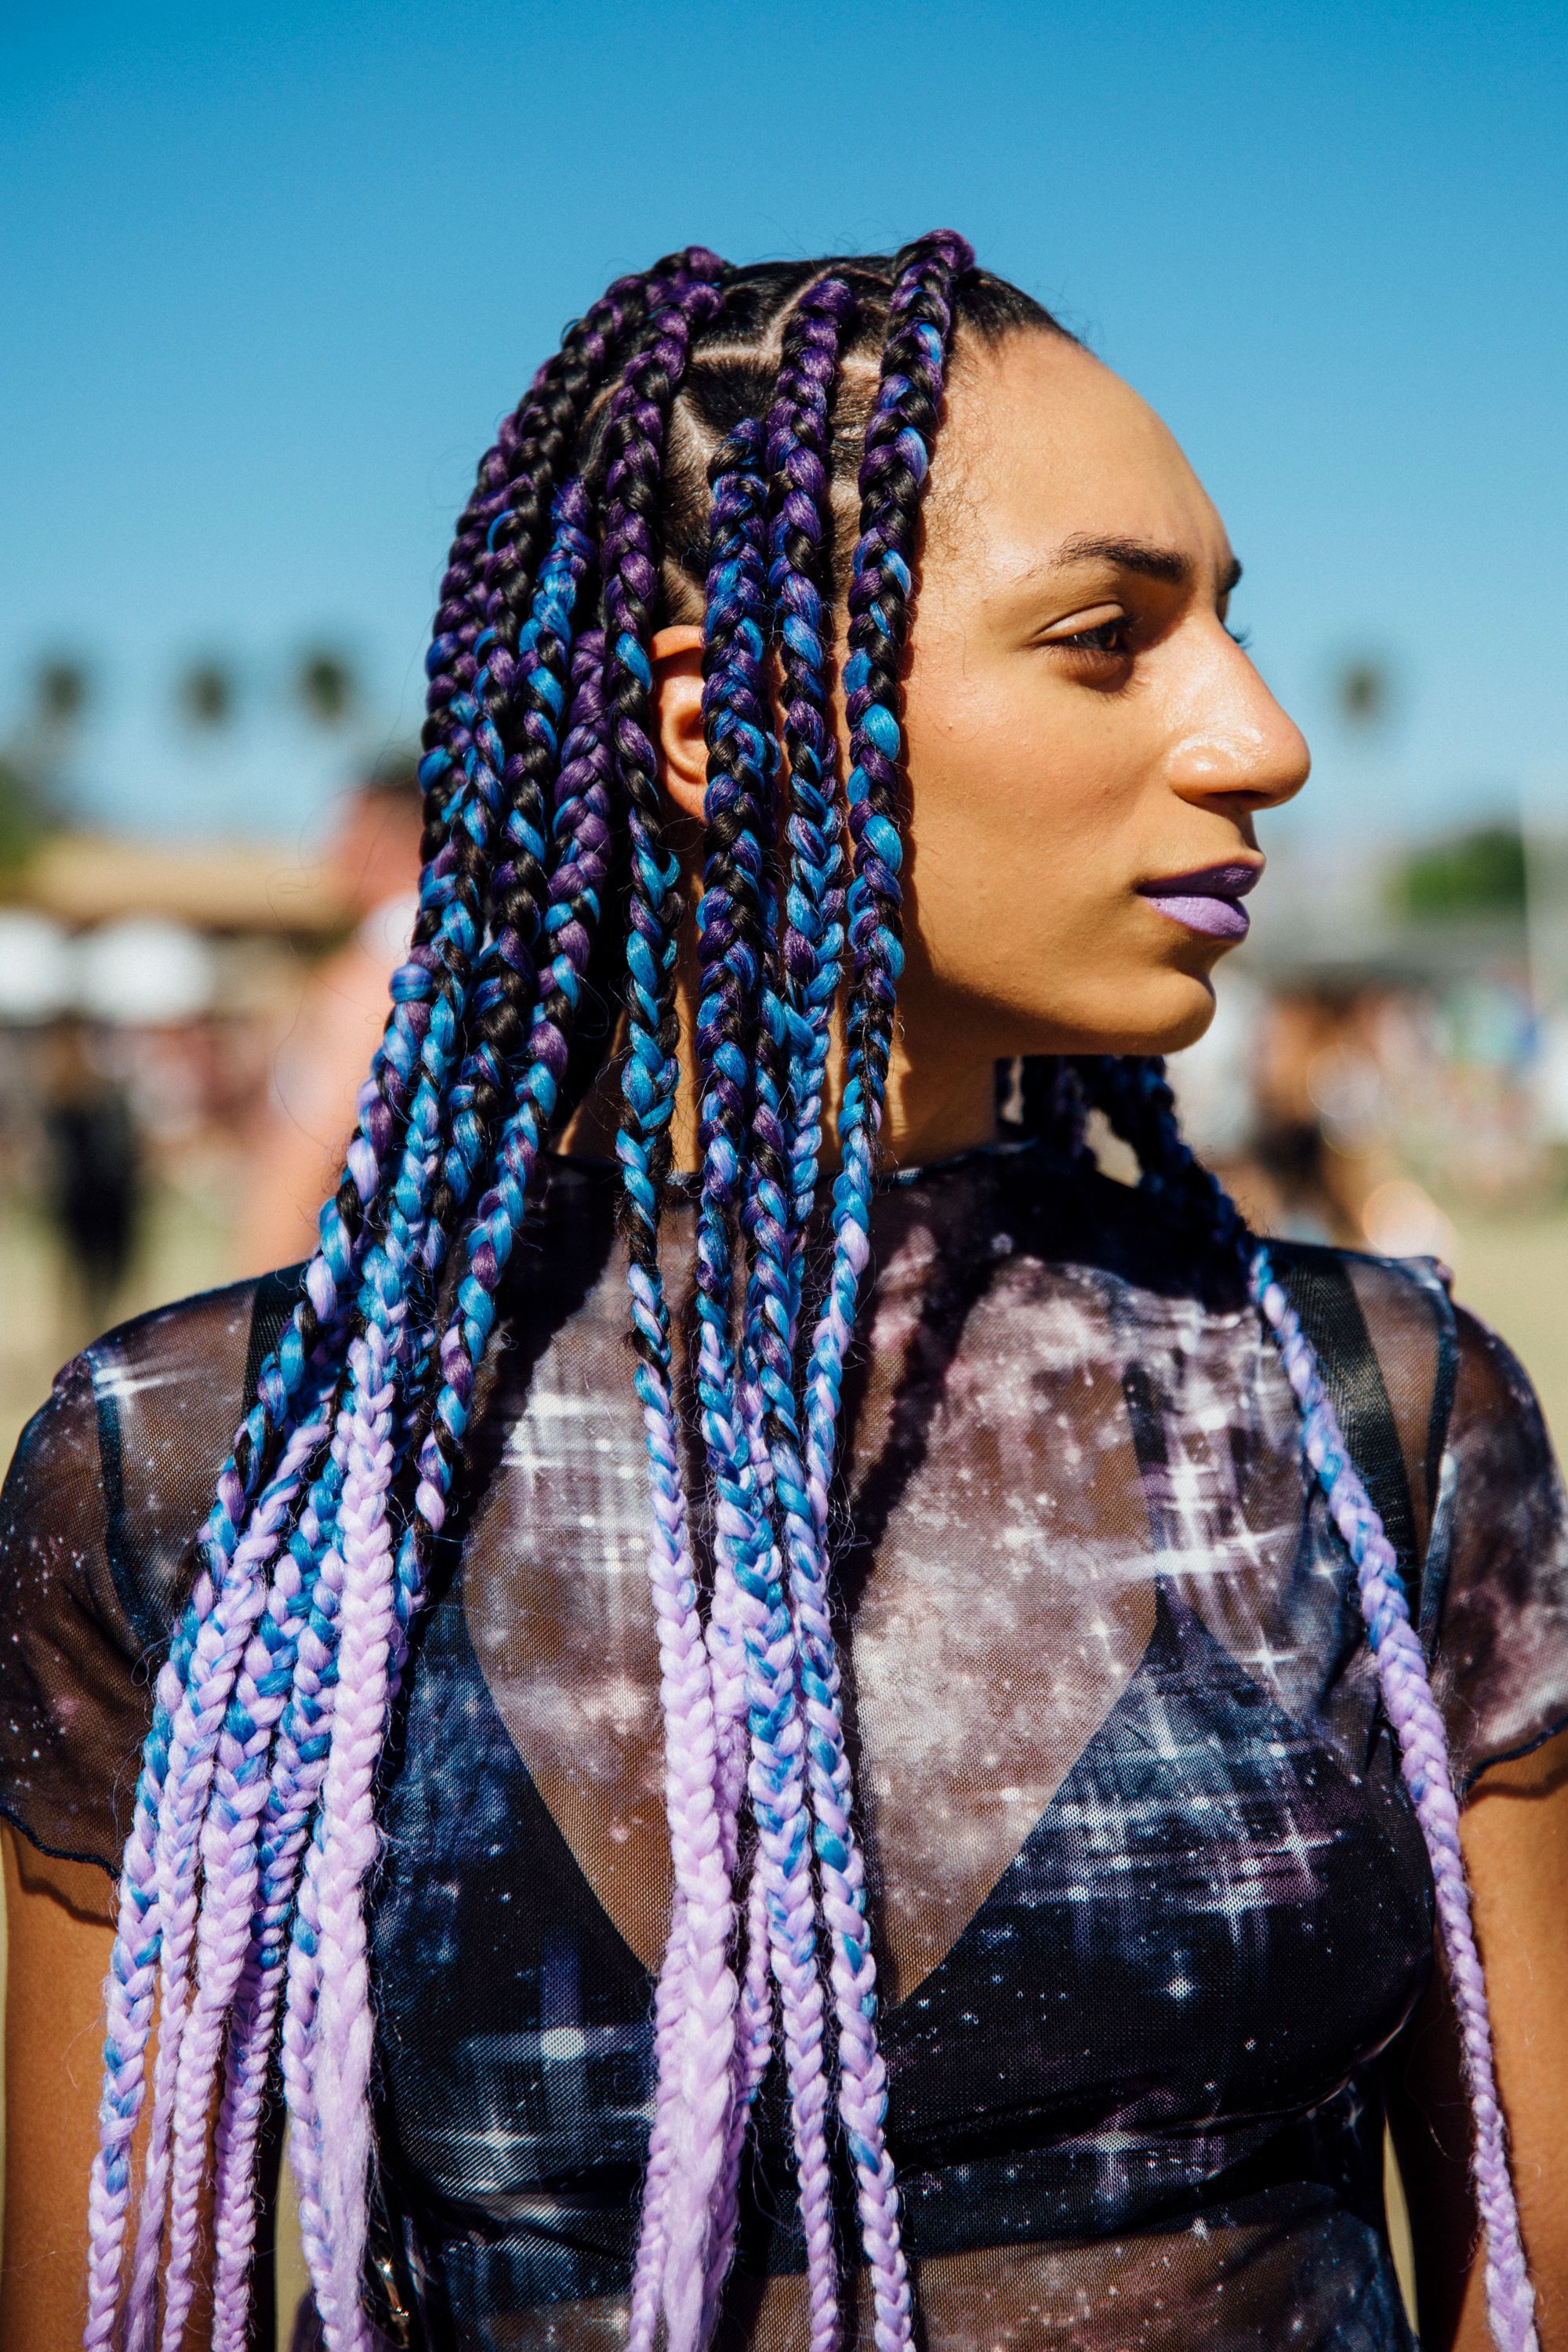 Pastel Hair Colour Style Trend At Coachella Festival With Most Recent Blue Braided Festival Hairstyles (View 9 of 20)